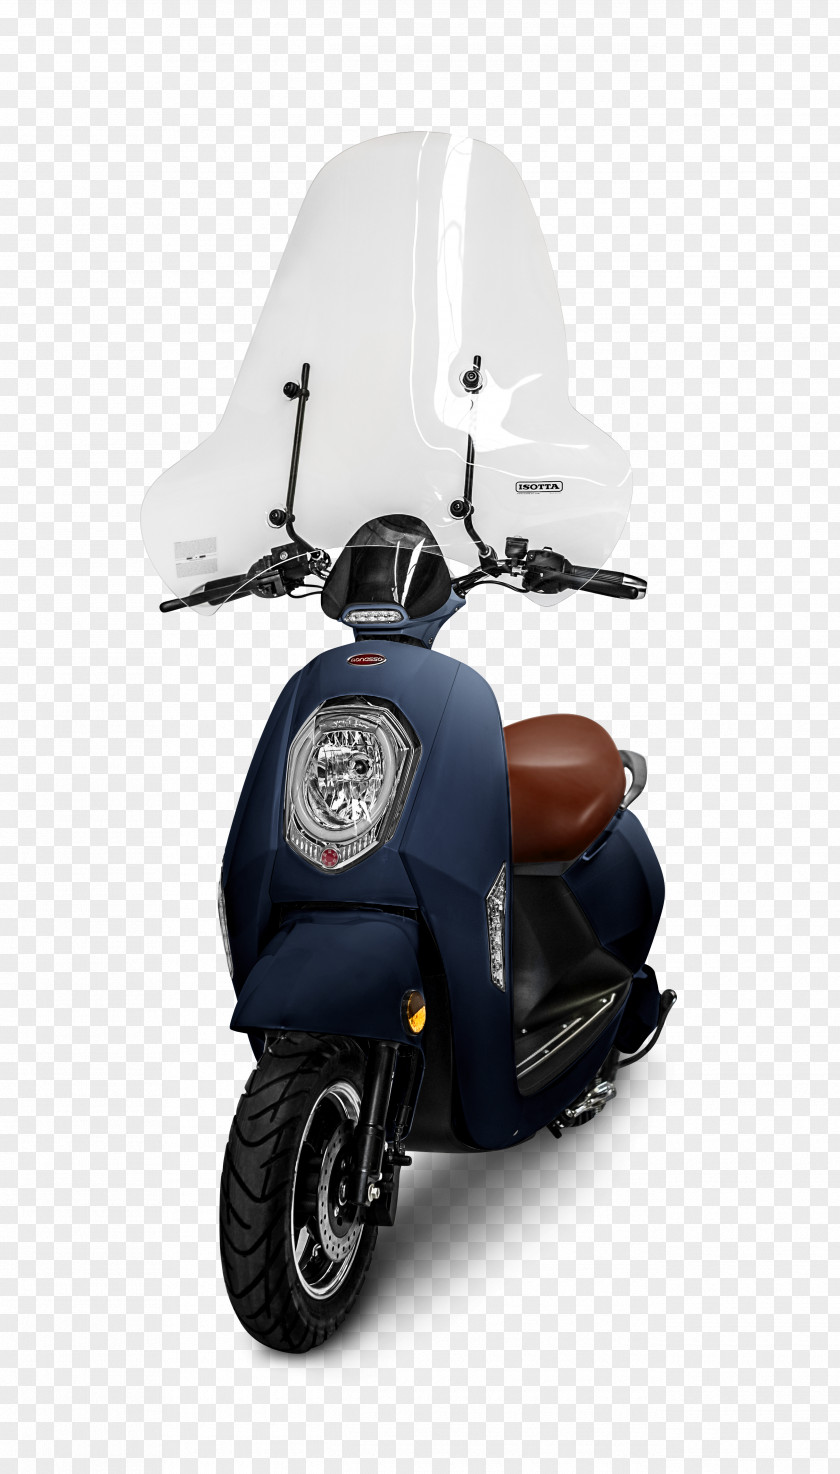 Scooter Electric Motorcycles And Scooters Monasso Peugeot Elektromotorroller PNG